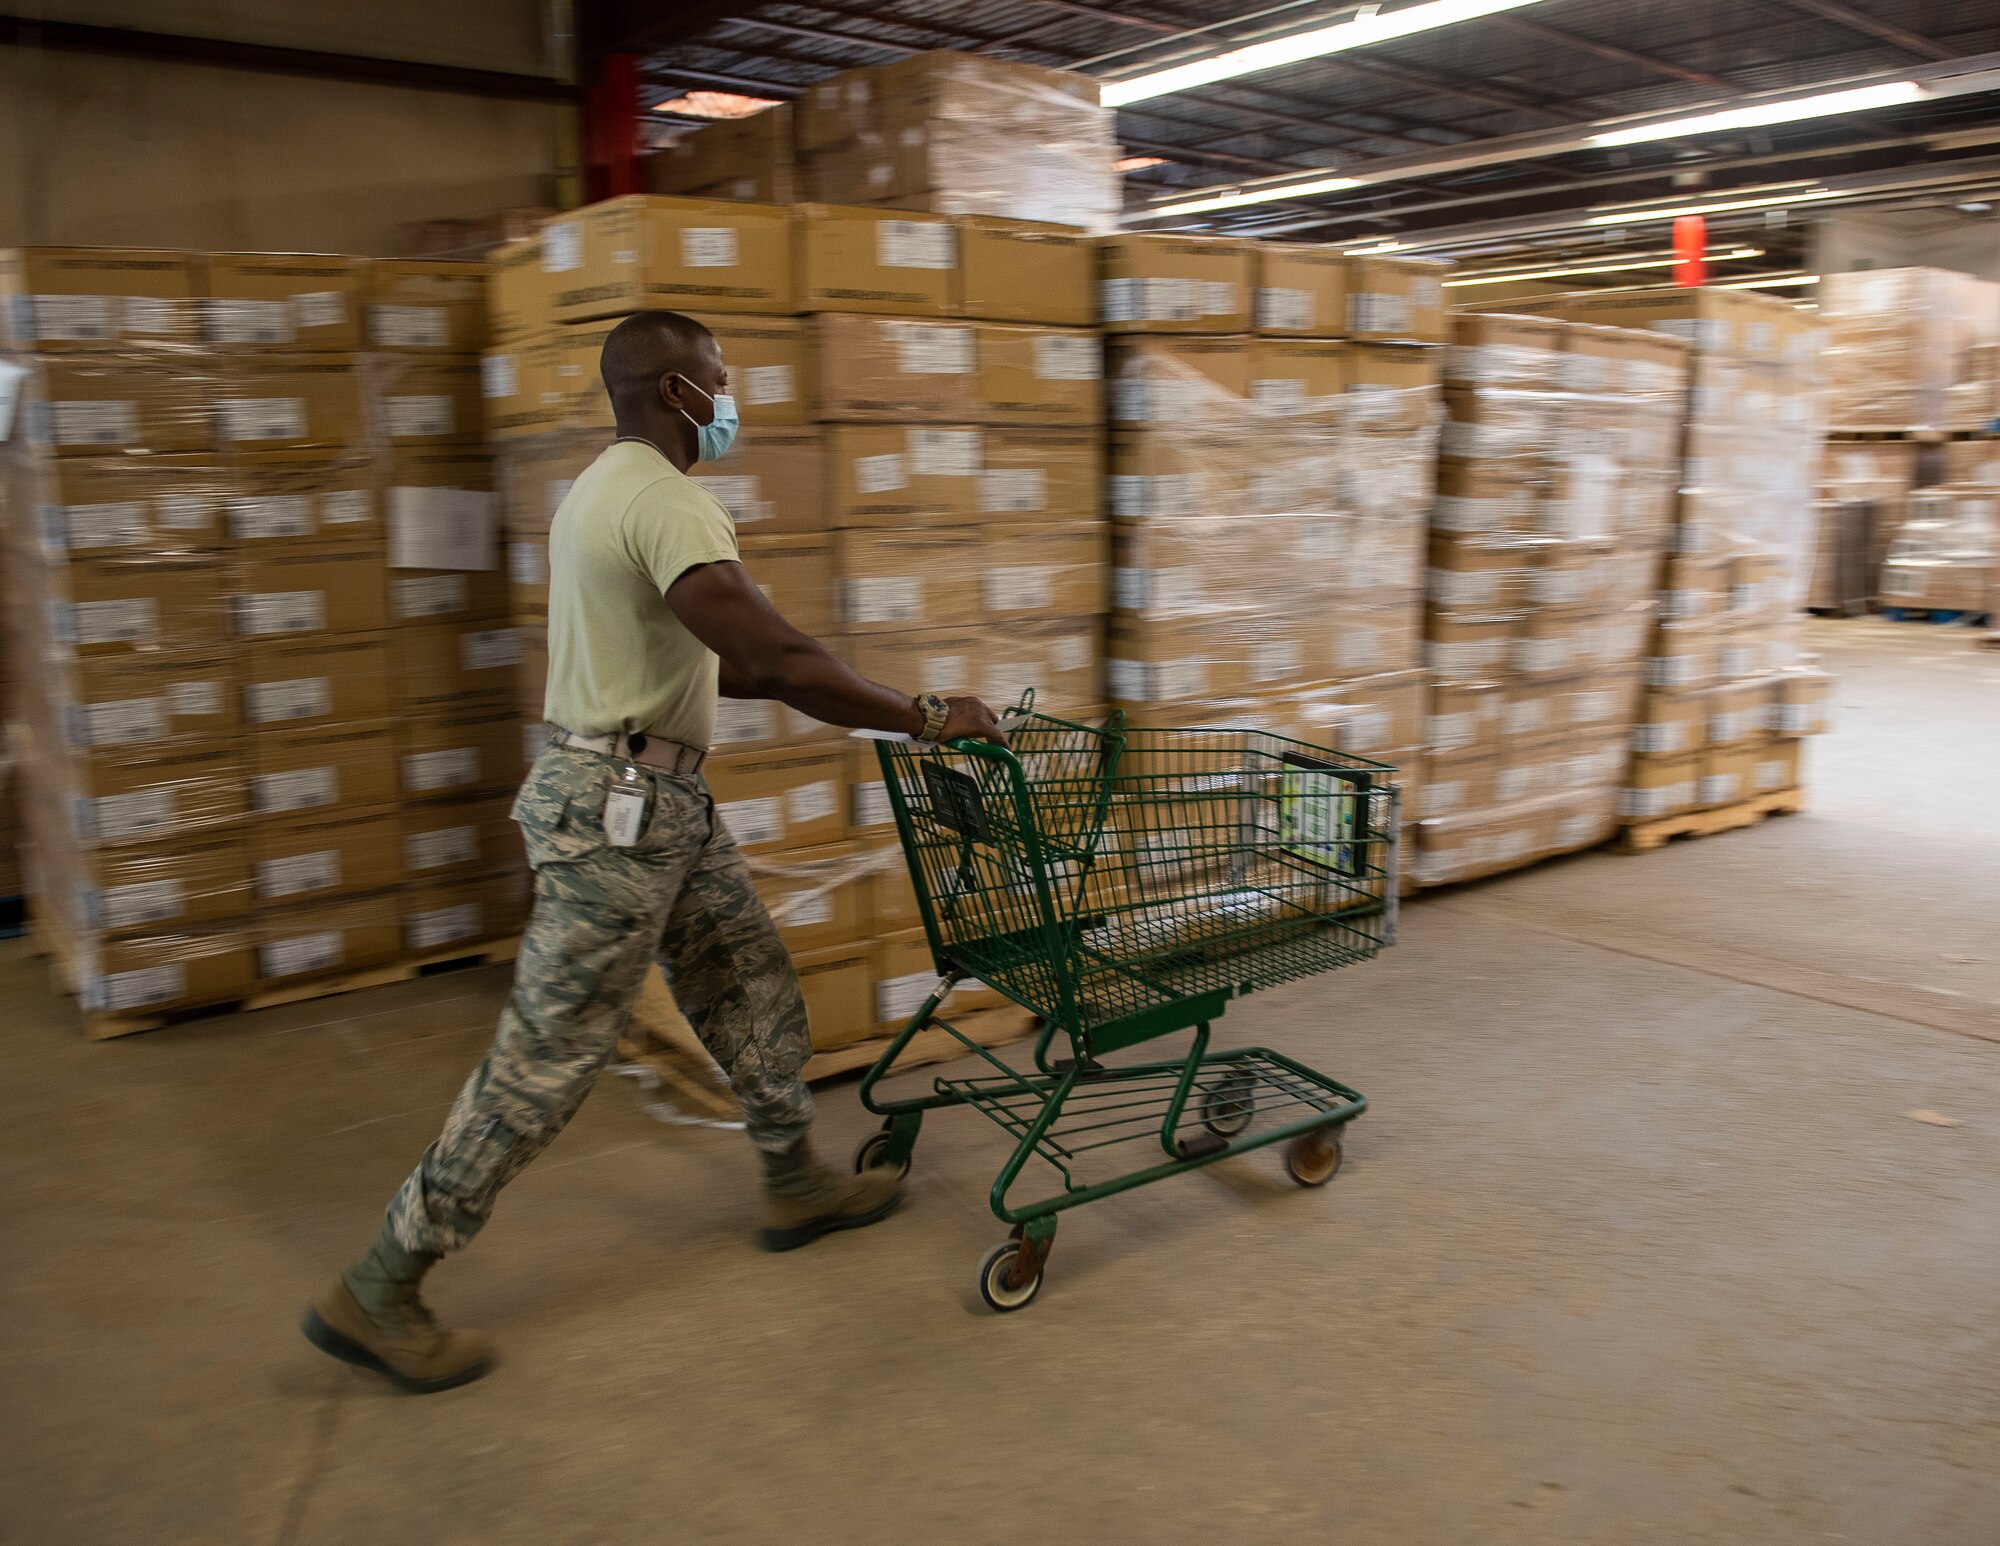 Airman 1st Class Abas Kallon from the 158th Fighter Wing, Vermont Air National Guard, retrieves personal protective equipment to fill an order at the Strategic National Stockpile Warehouse, Aug. 27, 2020. Airmen from across the 158th Fighter Wing have supported operations at the warehouse since March 2020.